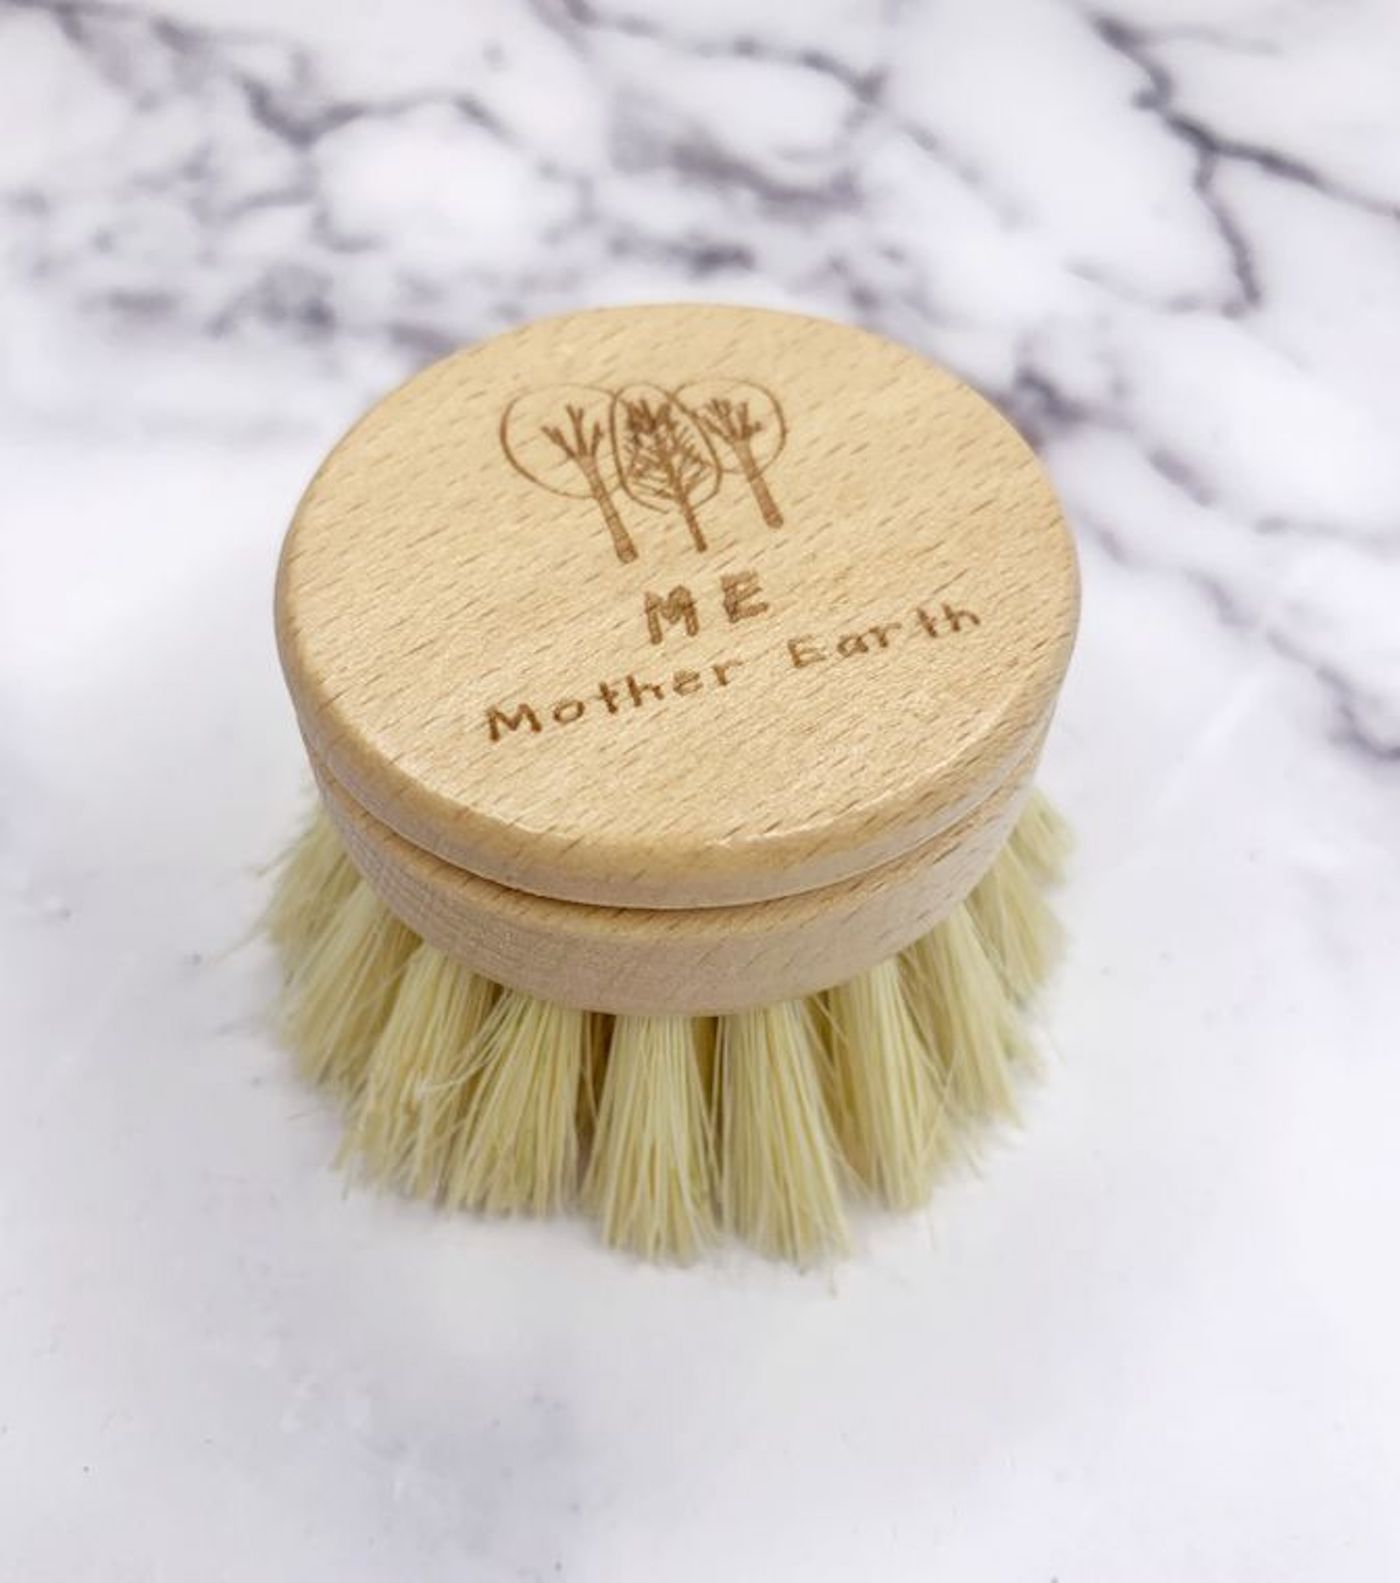 Long Handle Sisal Kitchen Brush- Refill Head Only Home Me Mother Earth 